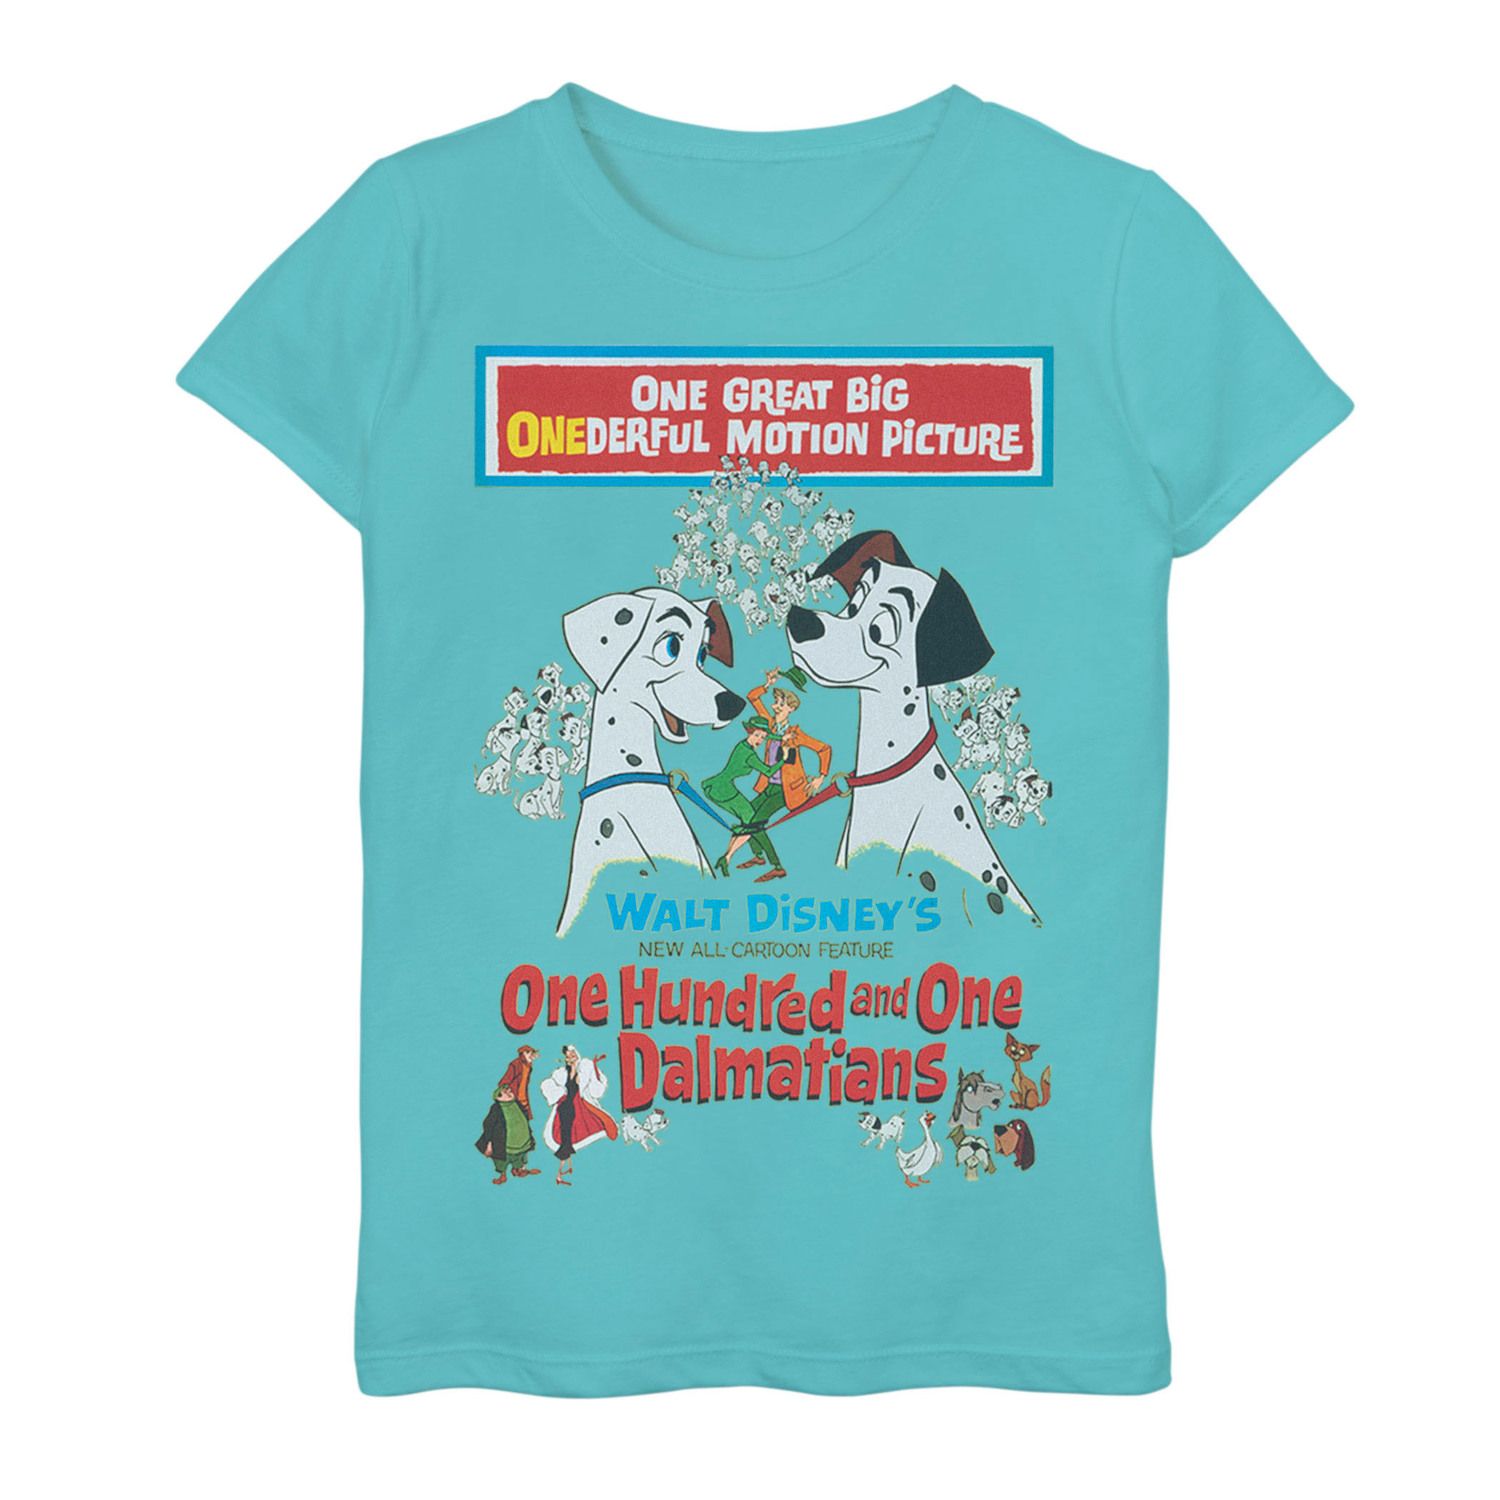 Image for Disney 's 101 Dalmatians Girls 7-16 Movie Promotion Graphic Tee at Kohl's.